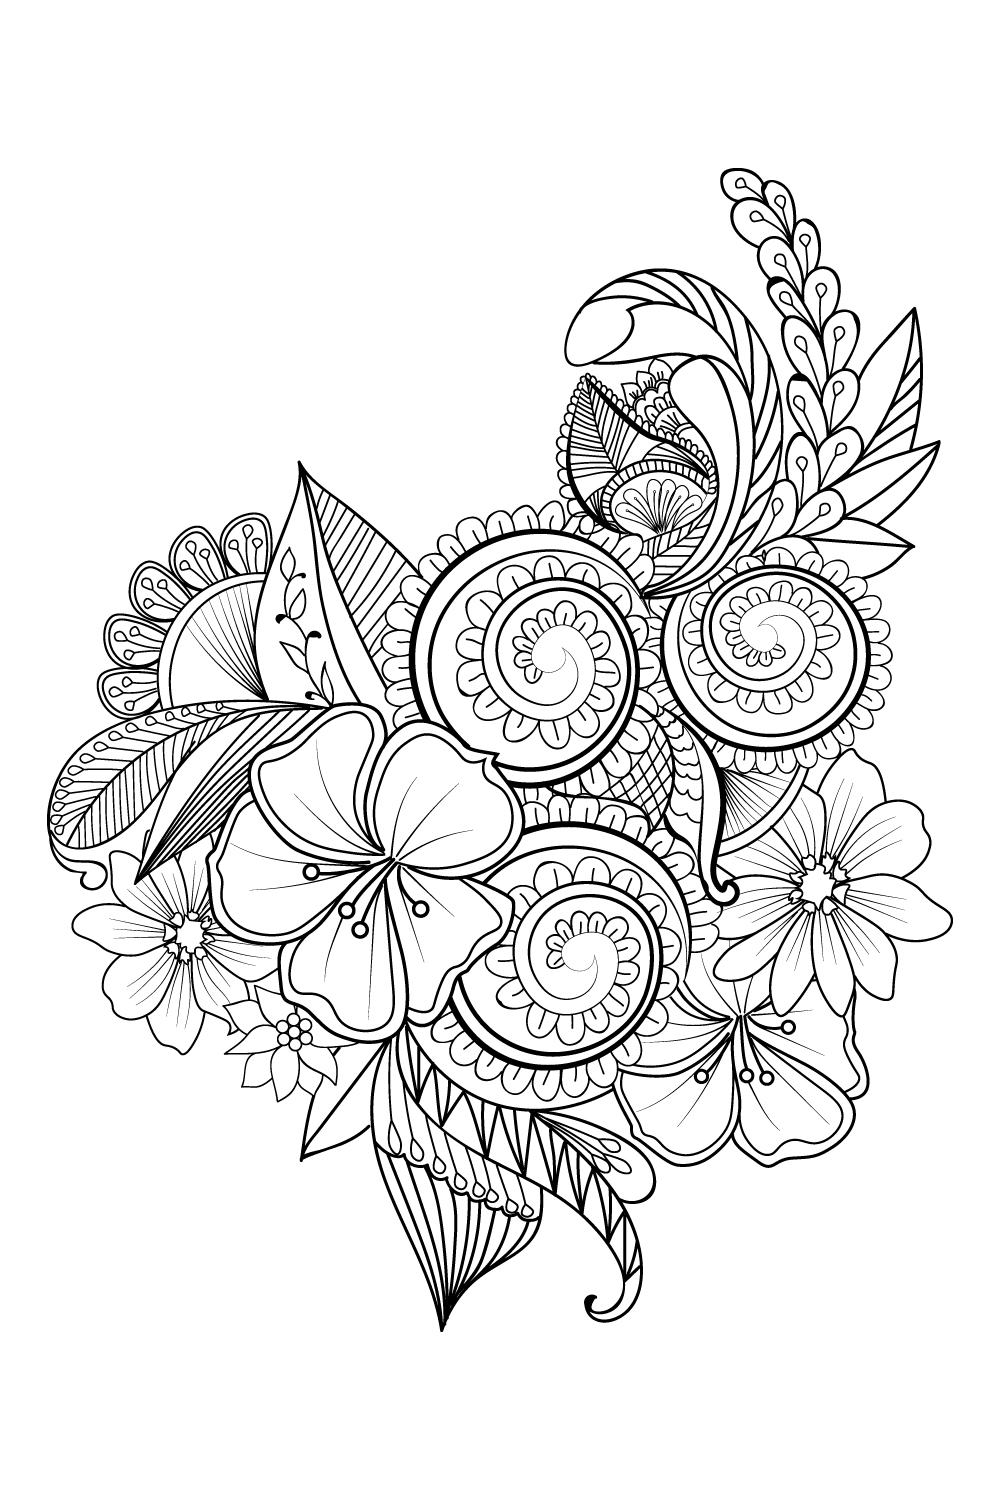 zentangle art, flower zentangle art, flower zendoodle zentangle art, zendoodle flower zentangle art, flower doodle coloring pages, line art flowers pinterest preview image.